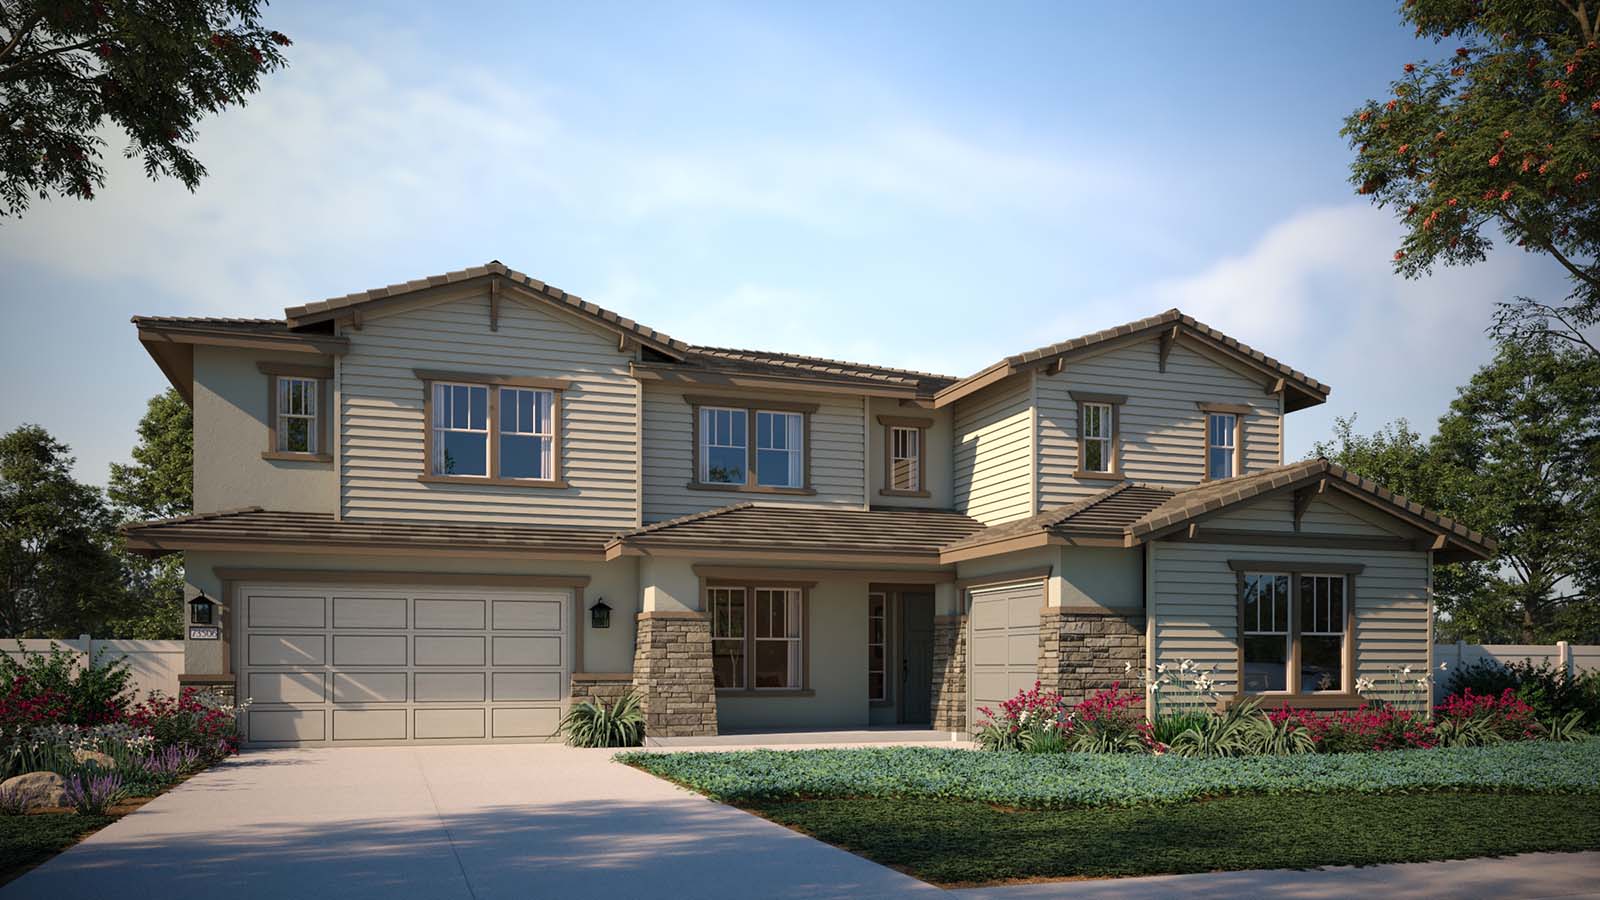 Exterior Elevation A - Plan Four - Acacia at Sommers Bend